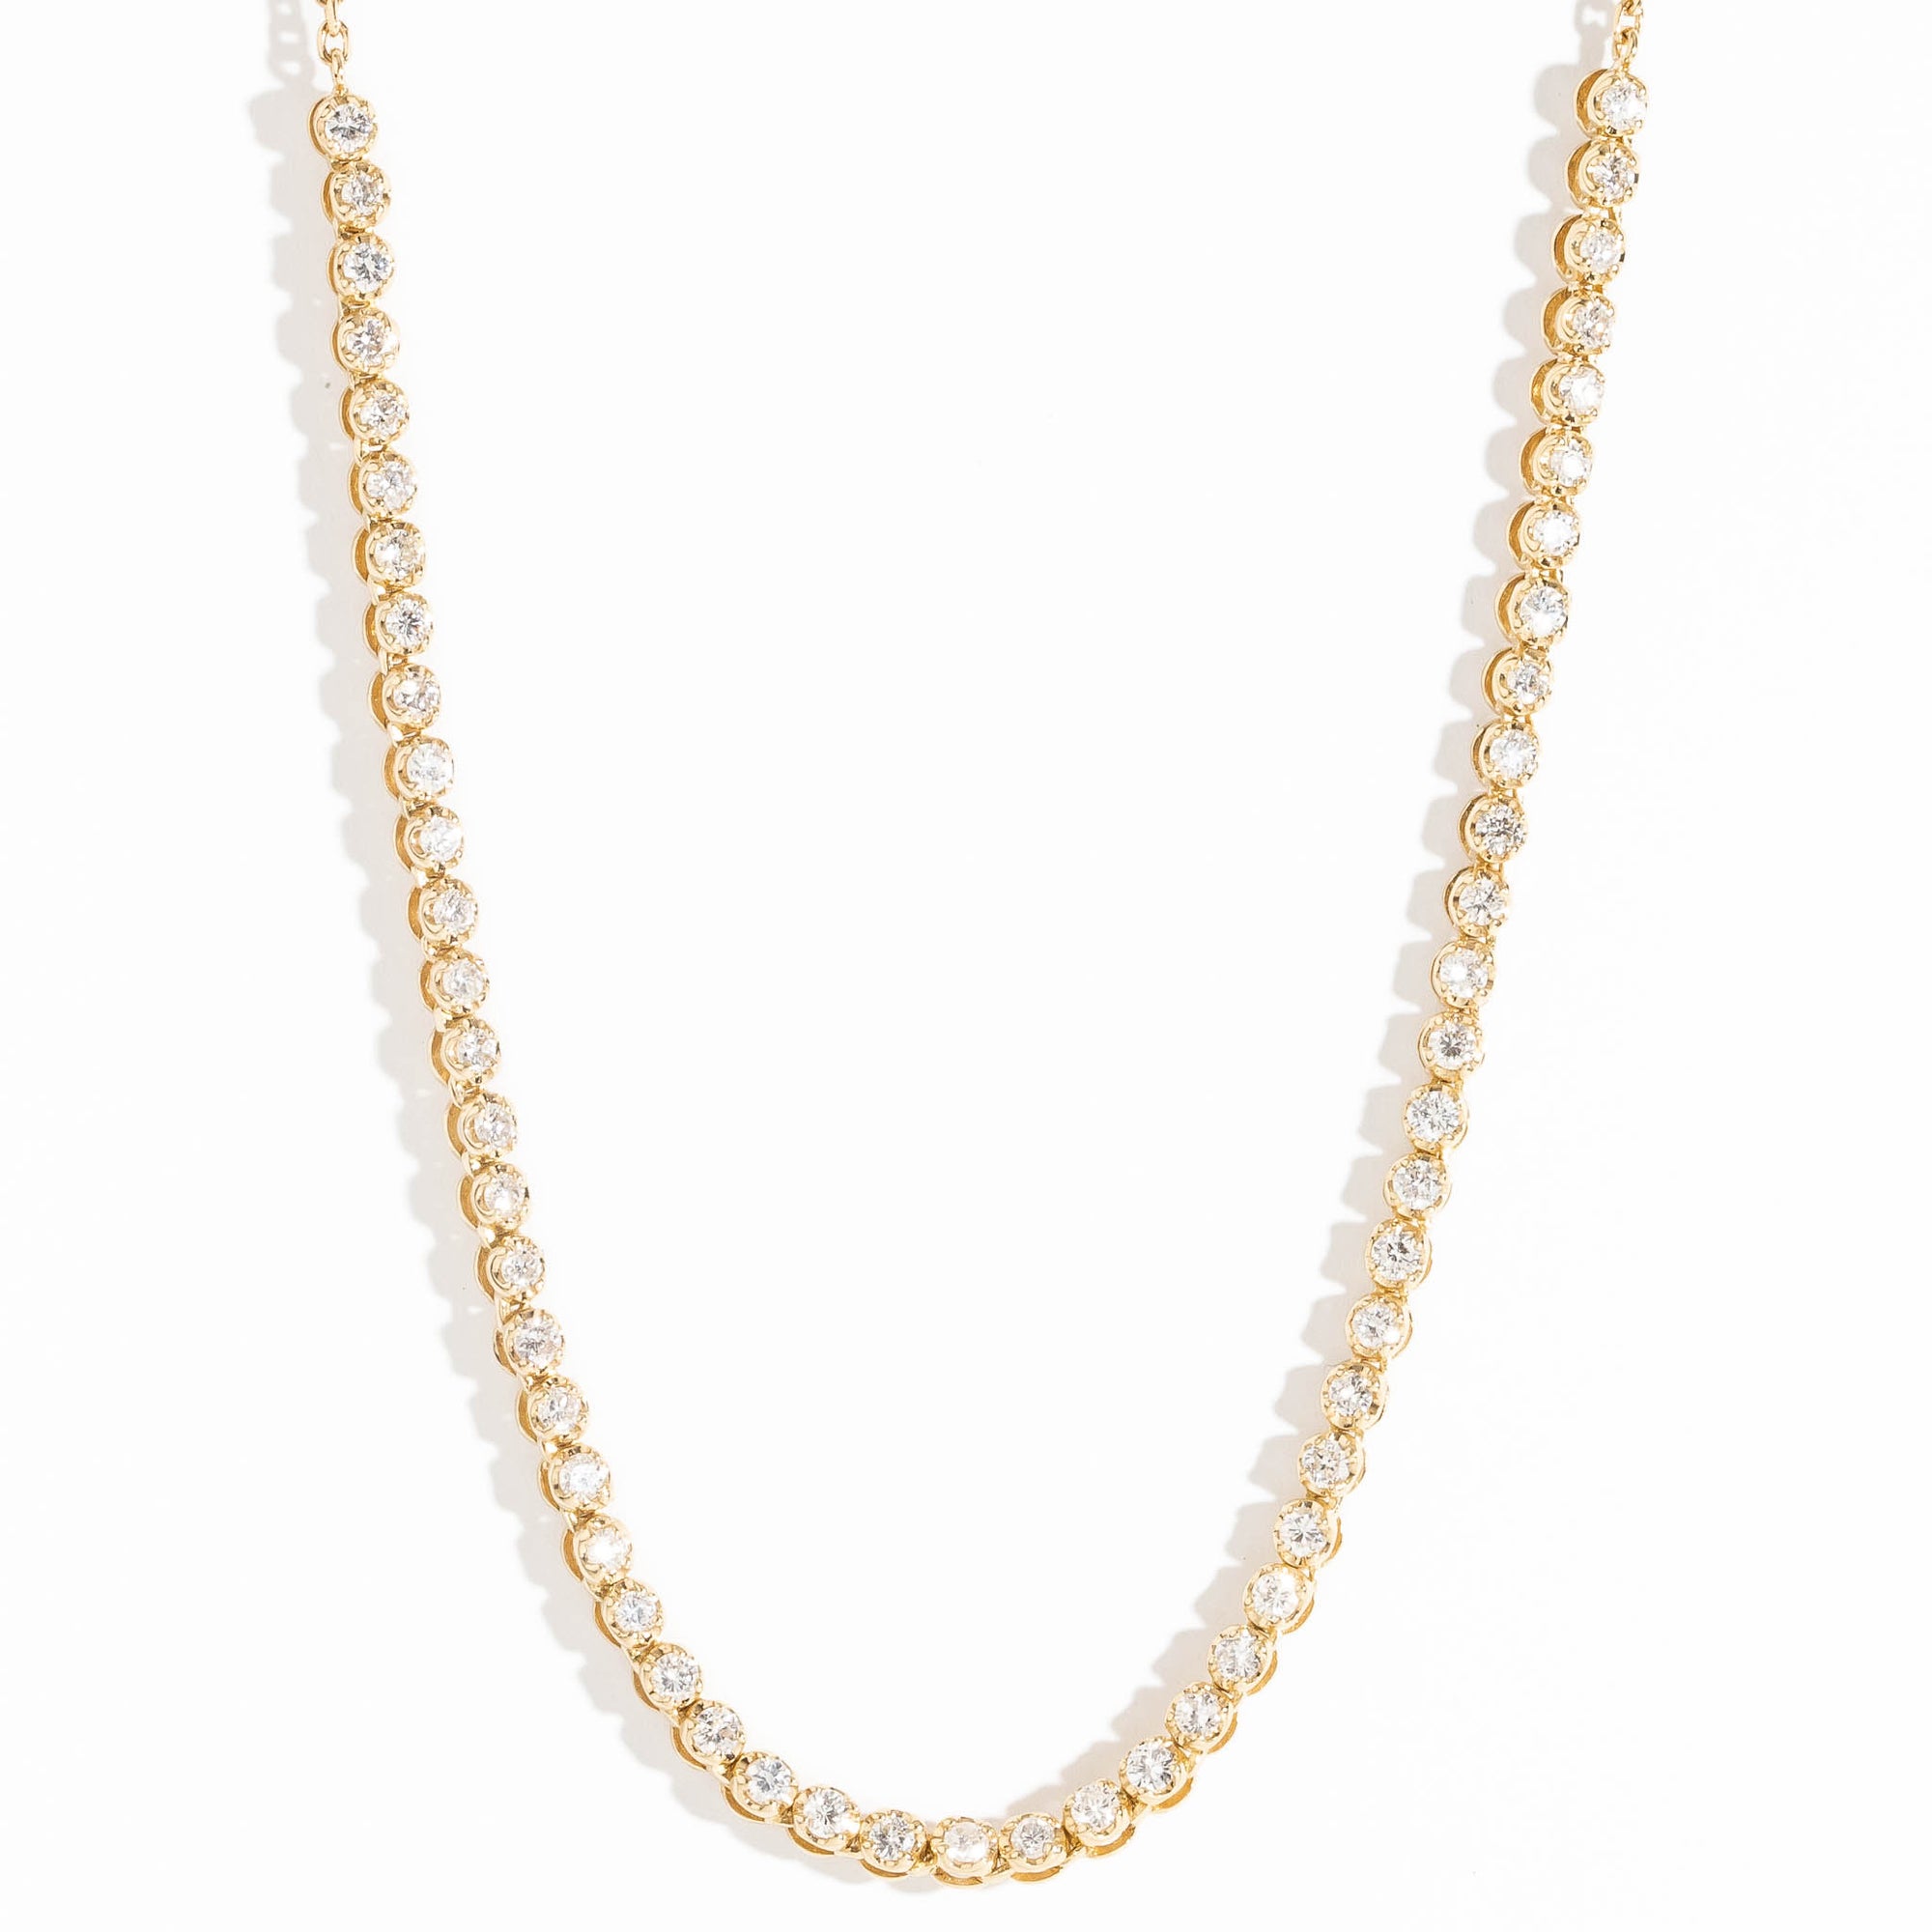  14 carat Yellow Gold tennis necklace with white diamonds